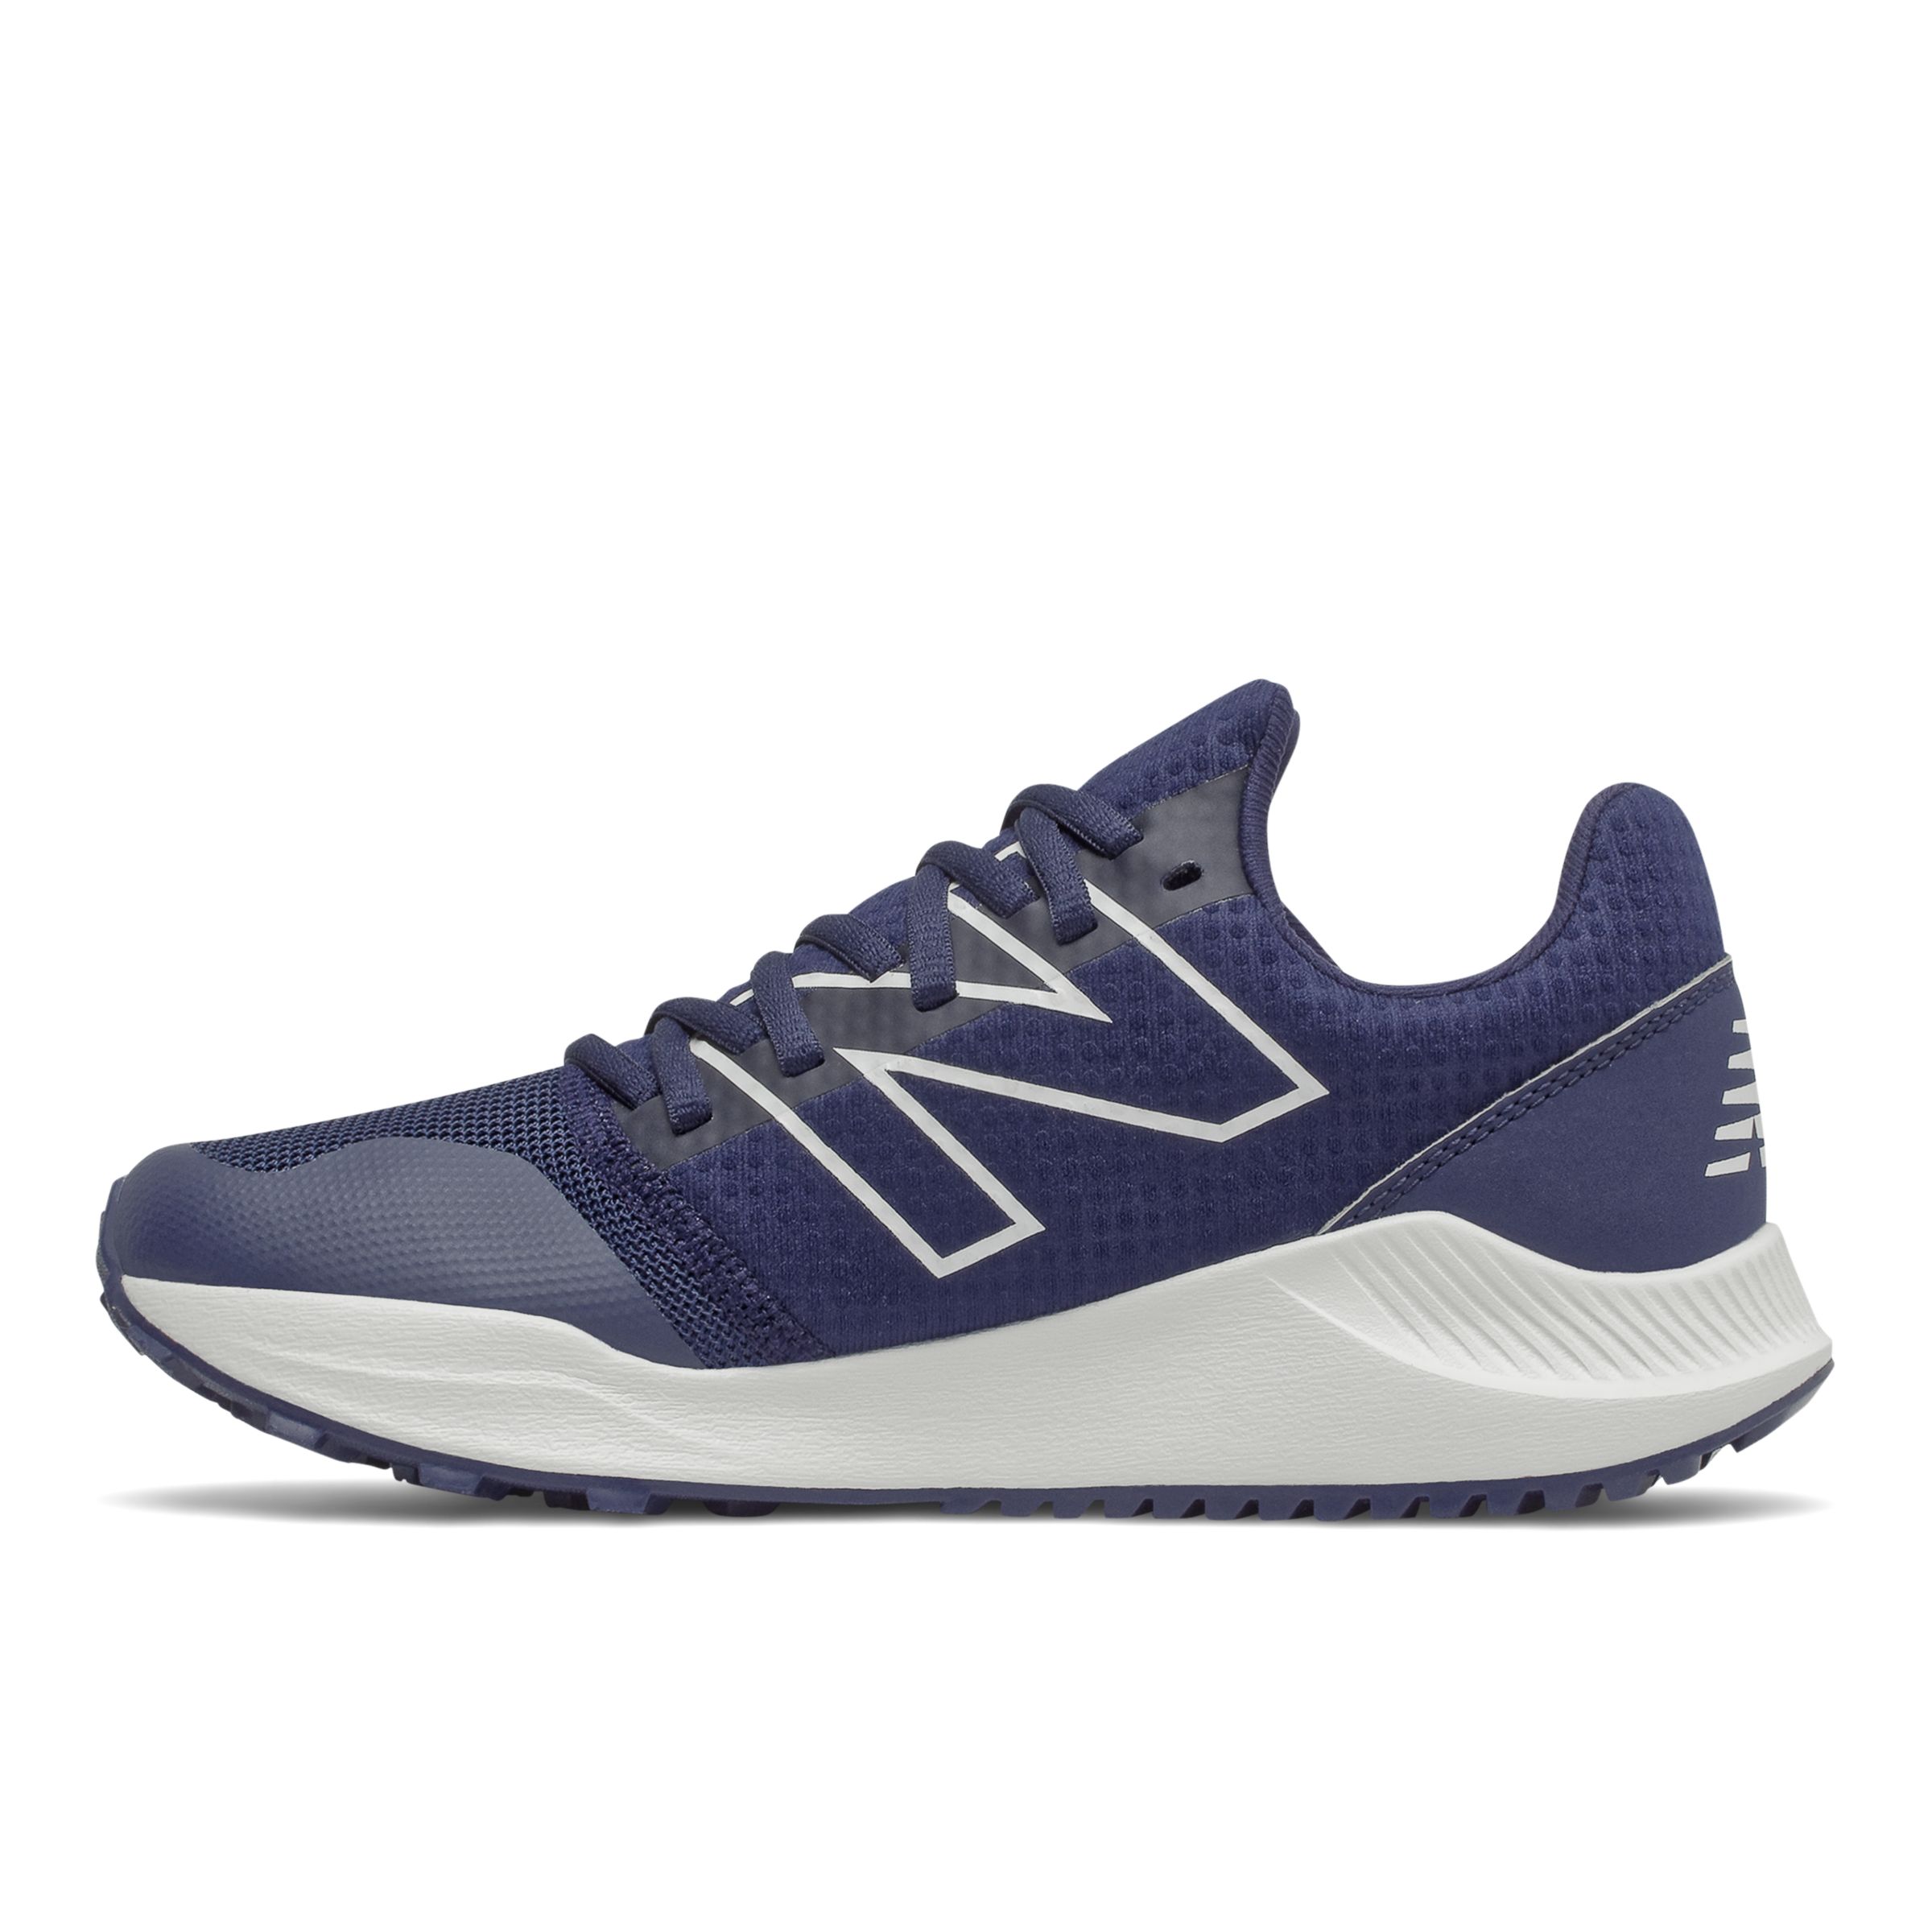 New Balance FuelCell 4040 v6 Turf Trainer (Navy with White